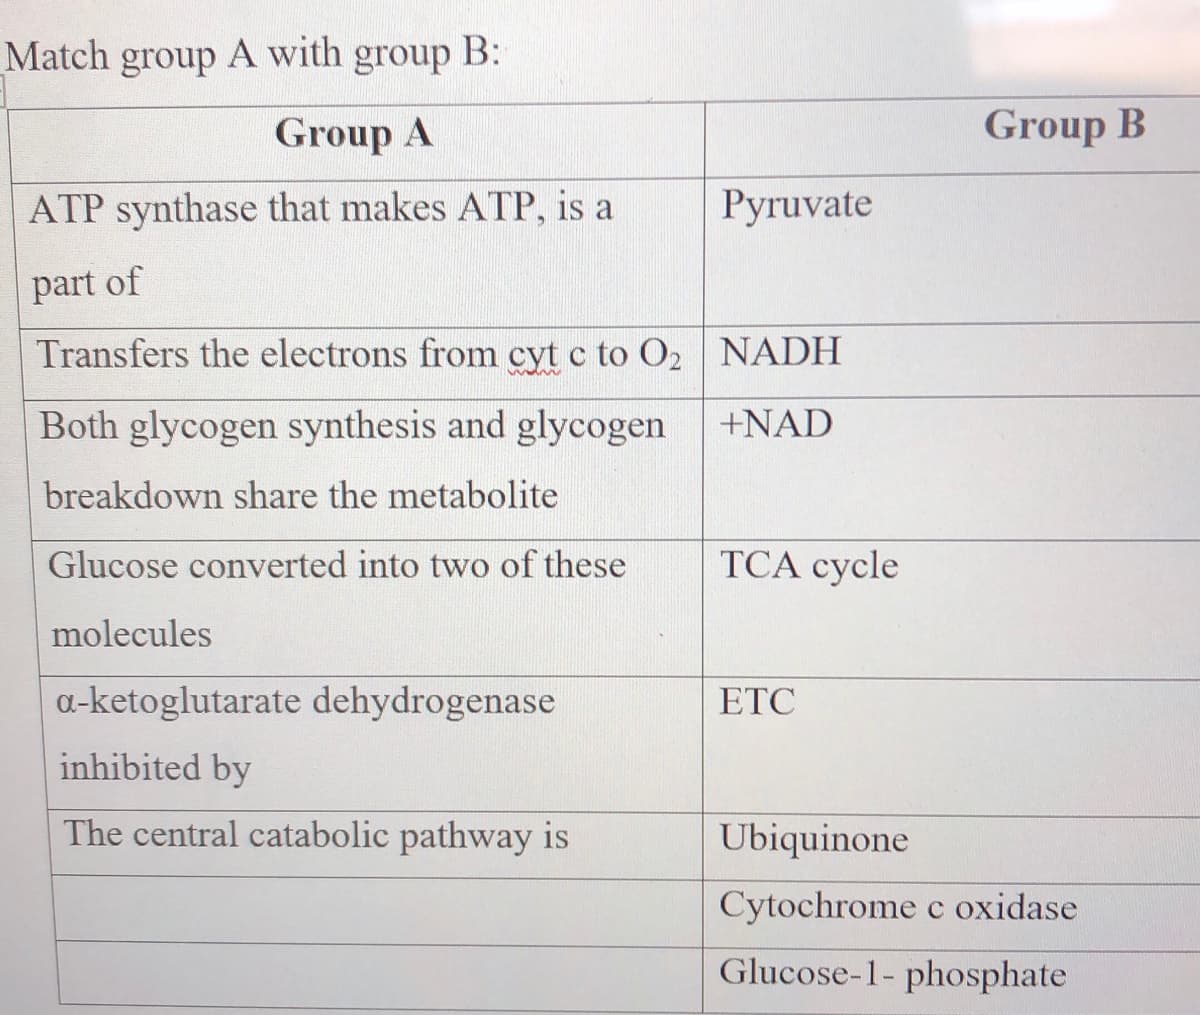 Match group A with group B:
Group A
Group B
ATP synthase that makes ATP, is a
Pyruvate
part of
Transfers the electrons from cyt c to O2 NADH
Both glycogen synthesis and glycogen
+NAD
breakdown share the metabolite
Glucose converted into two of these
ТСА суcle
molecules
a-ketoglutarate dehydrogenase
ETC
inhibited by
The central catabolic pathway is
Ubiquinone
Cytochrome c oxidase
Glucose-1- phosphate
